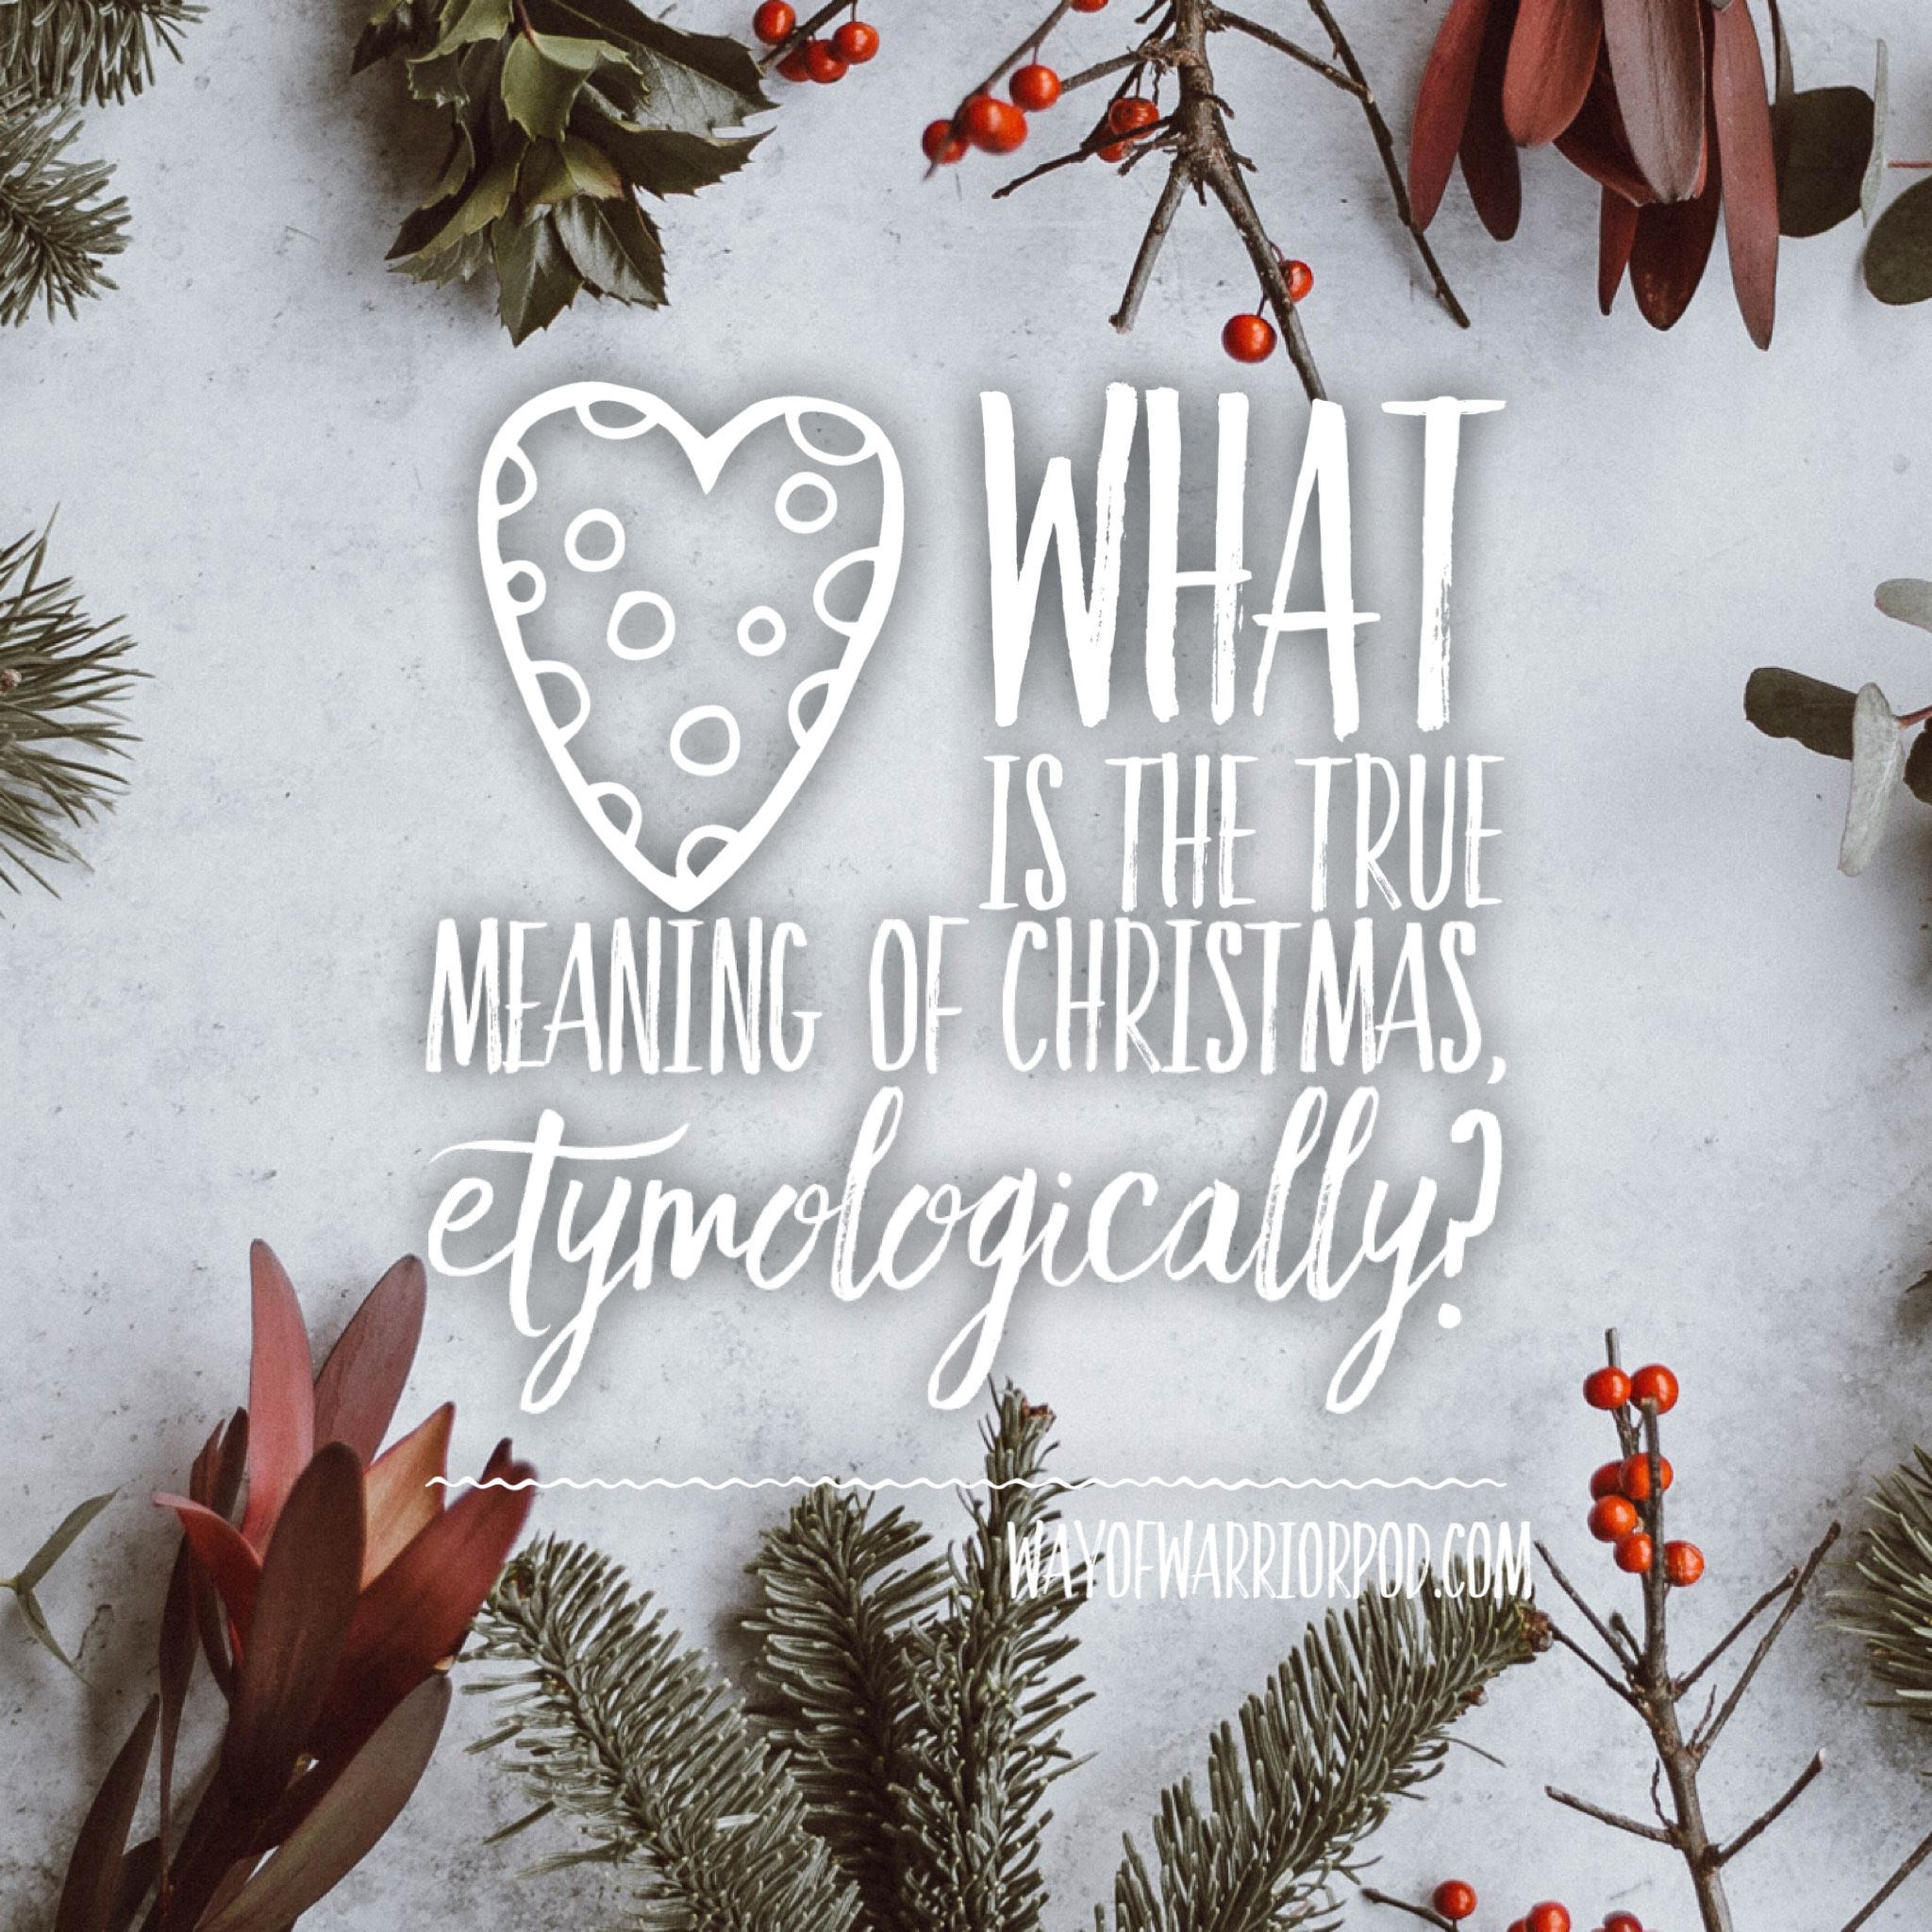 What is the True Meaning of Christmas, Etymologically?